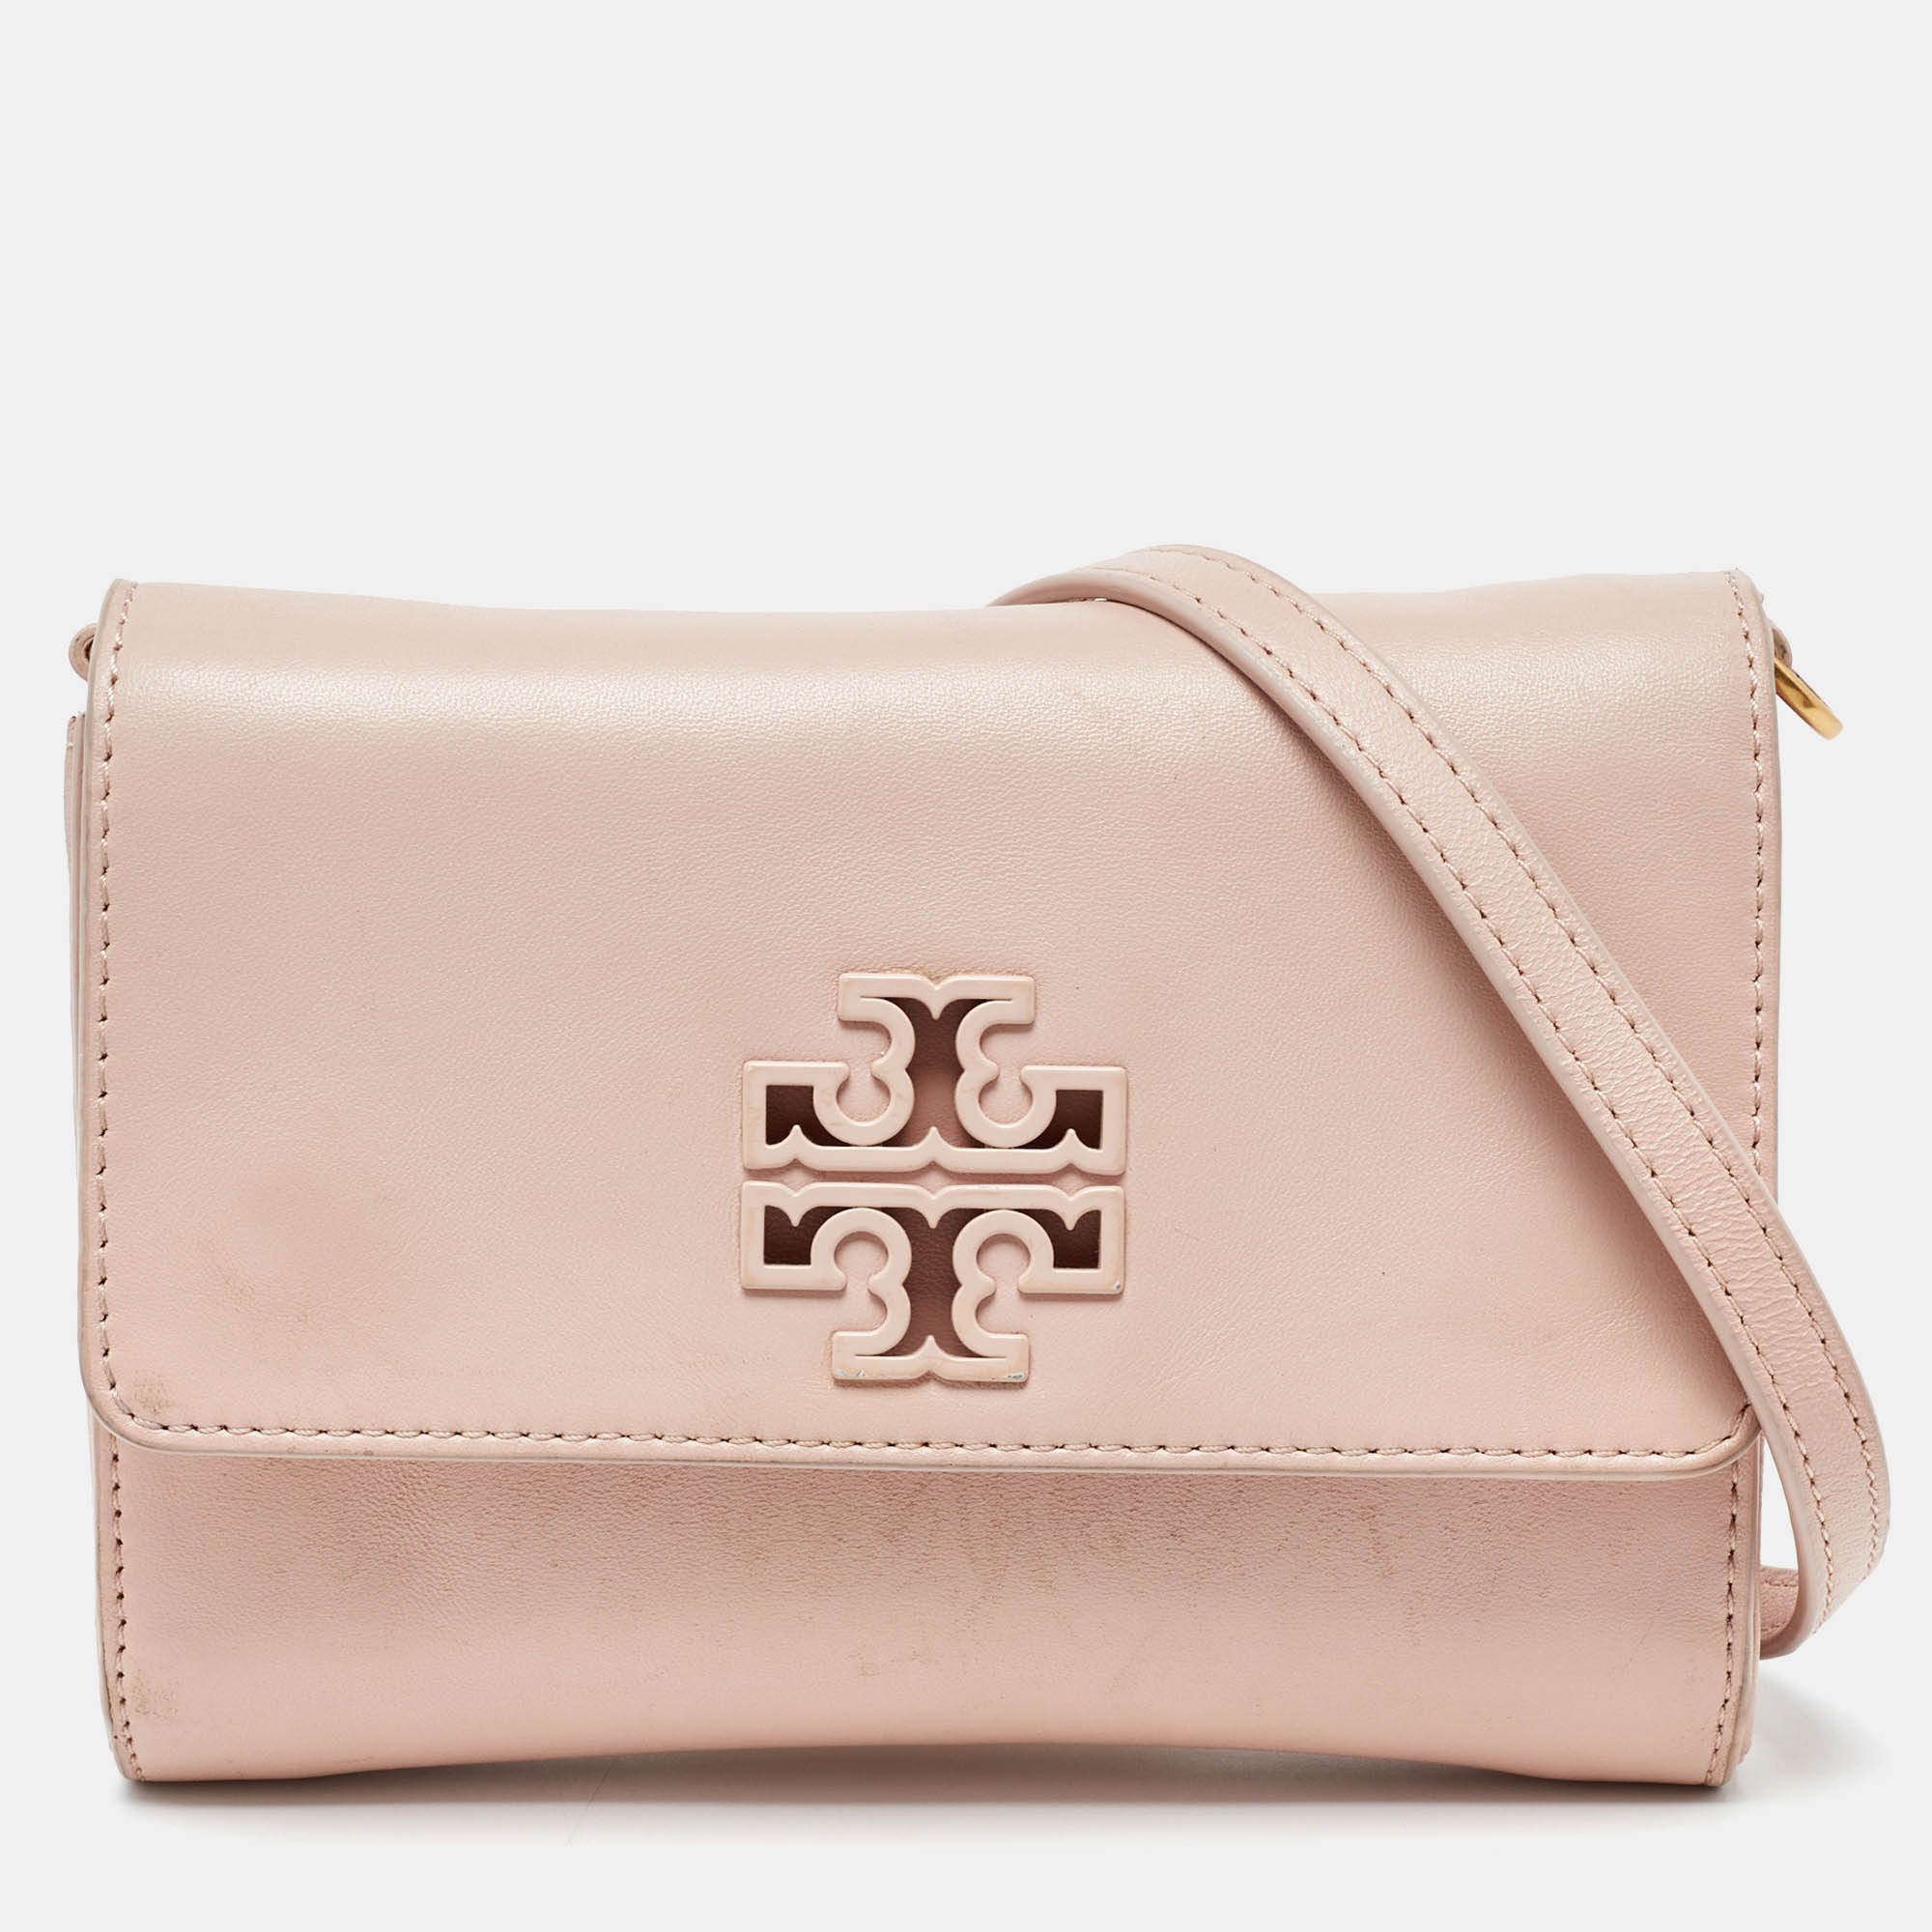 Pre-owned Tory Burch Pink Leather Britten Flap Crossbody Bag